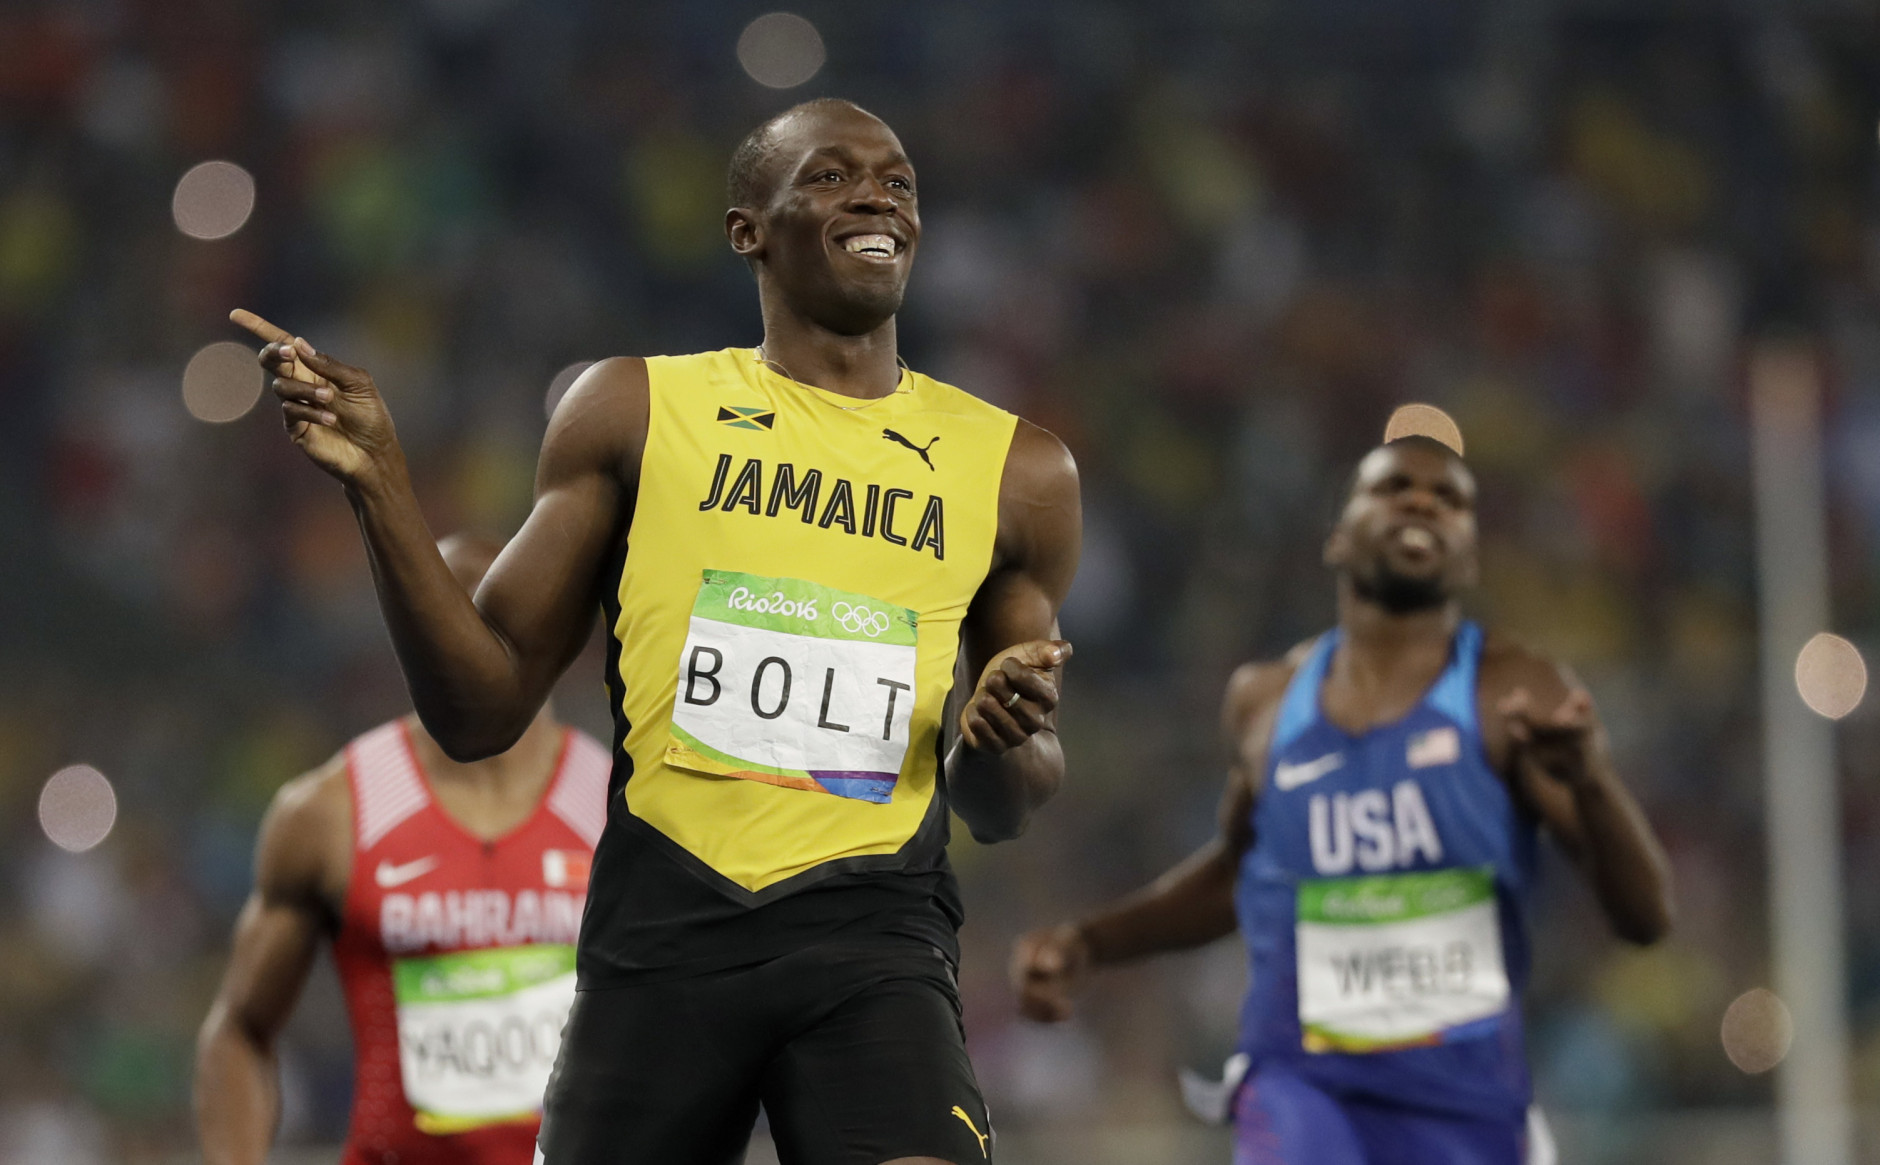 Jamaica's Usain Bolt wins a men's 200-meter semifinal during the athletics competitions of the 2016 Summer Olympics at the Olympic stadium in Rio de Janeiro, Brazil, Wednesday, Aug. 17, 2016. (AP Photo/David J. Phillip)